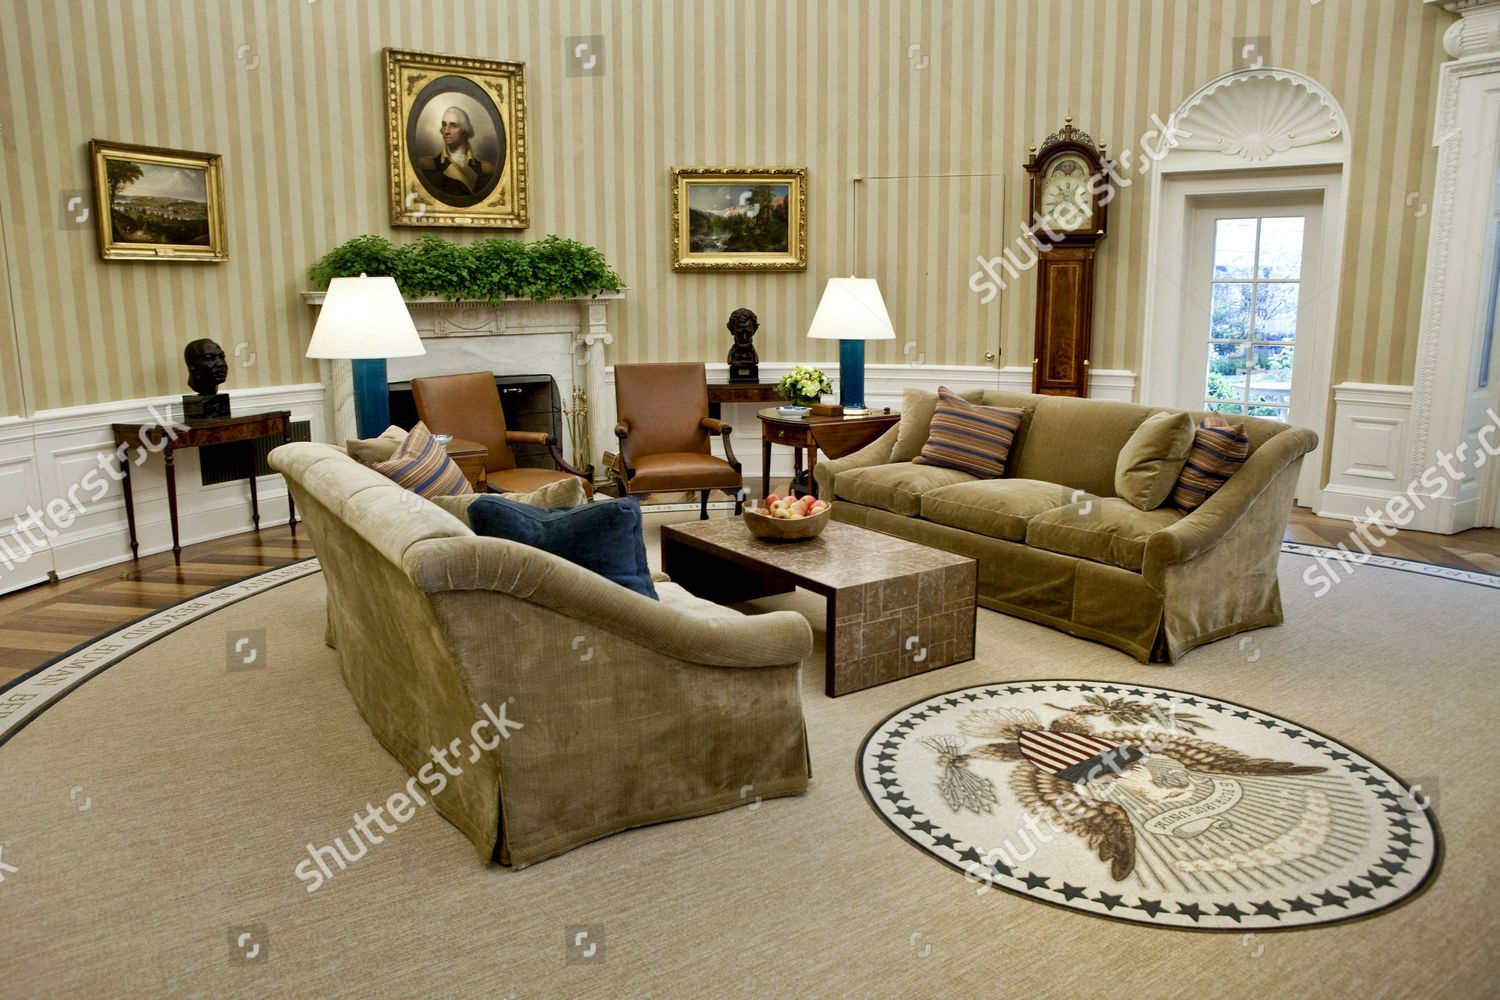 Redecorated Oval Office Editorial Stock Photo Stock Image